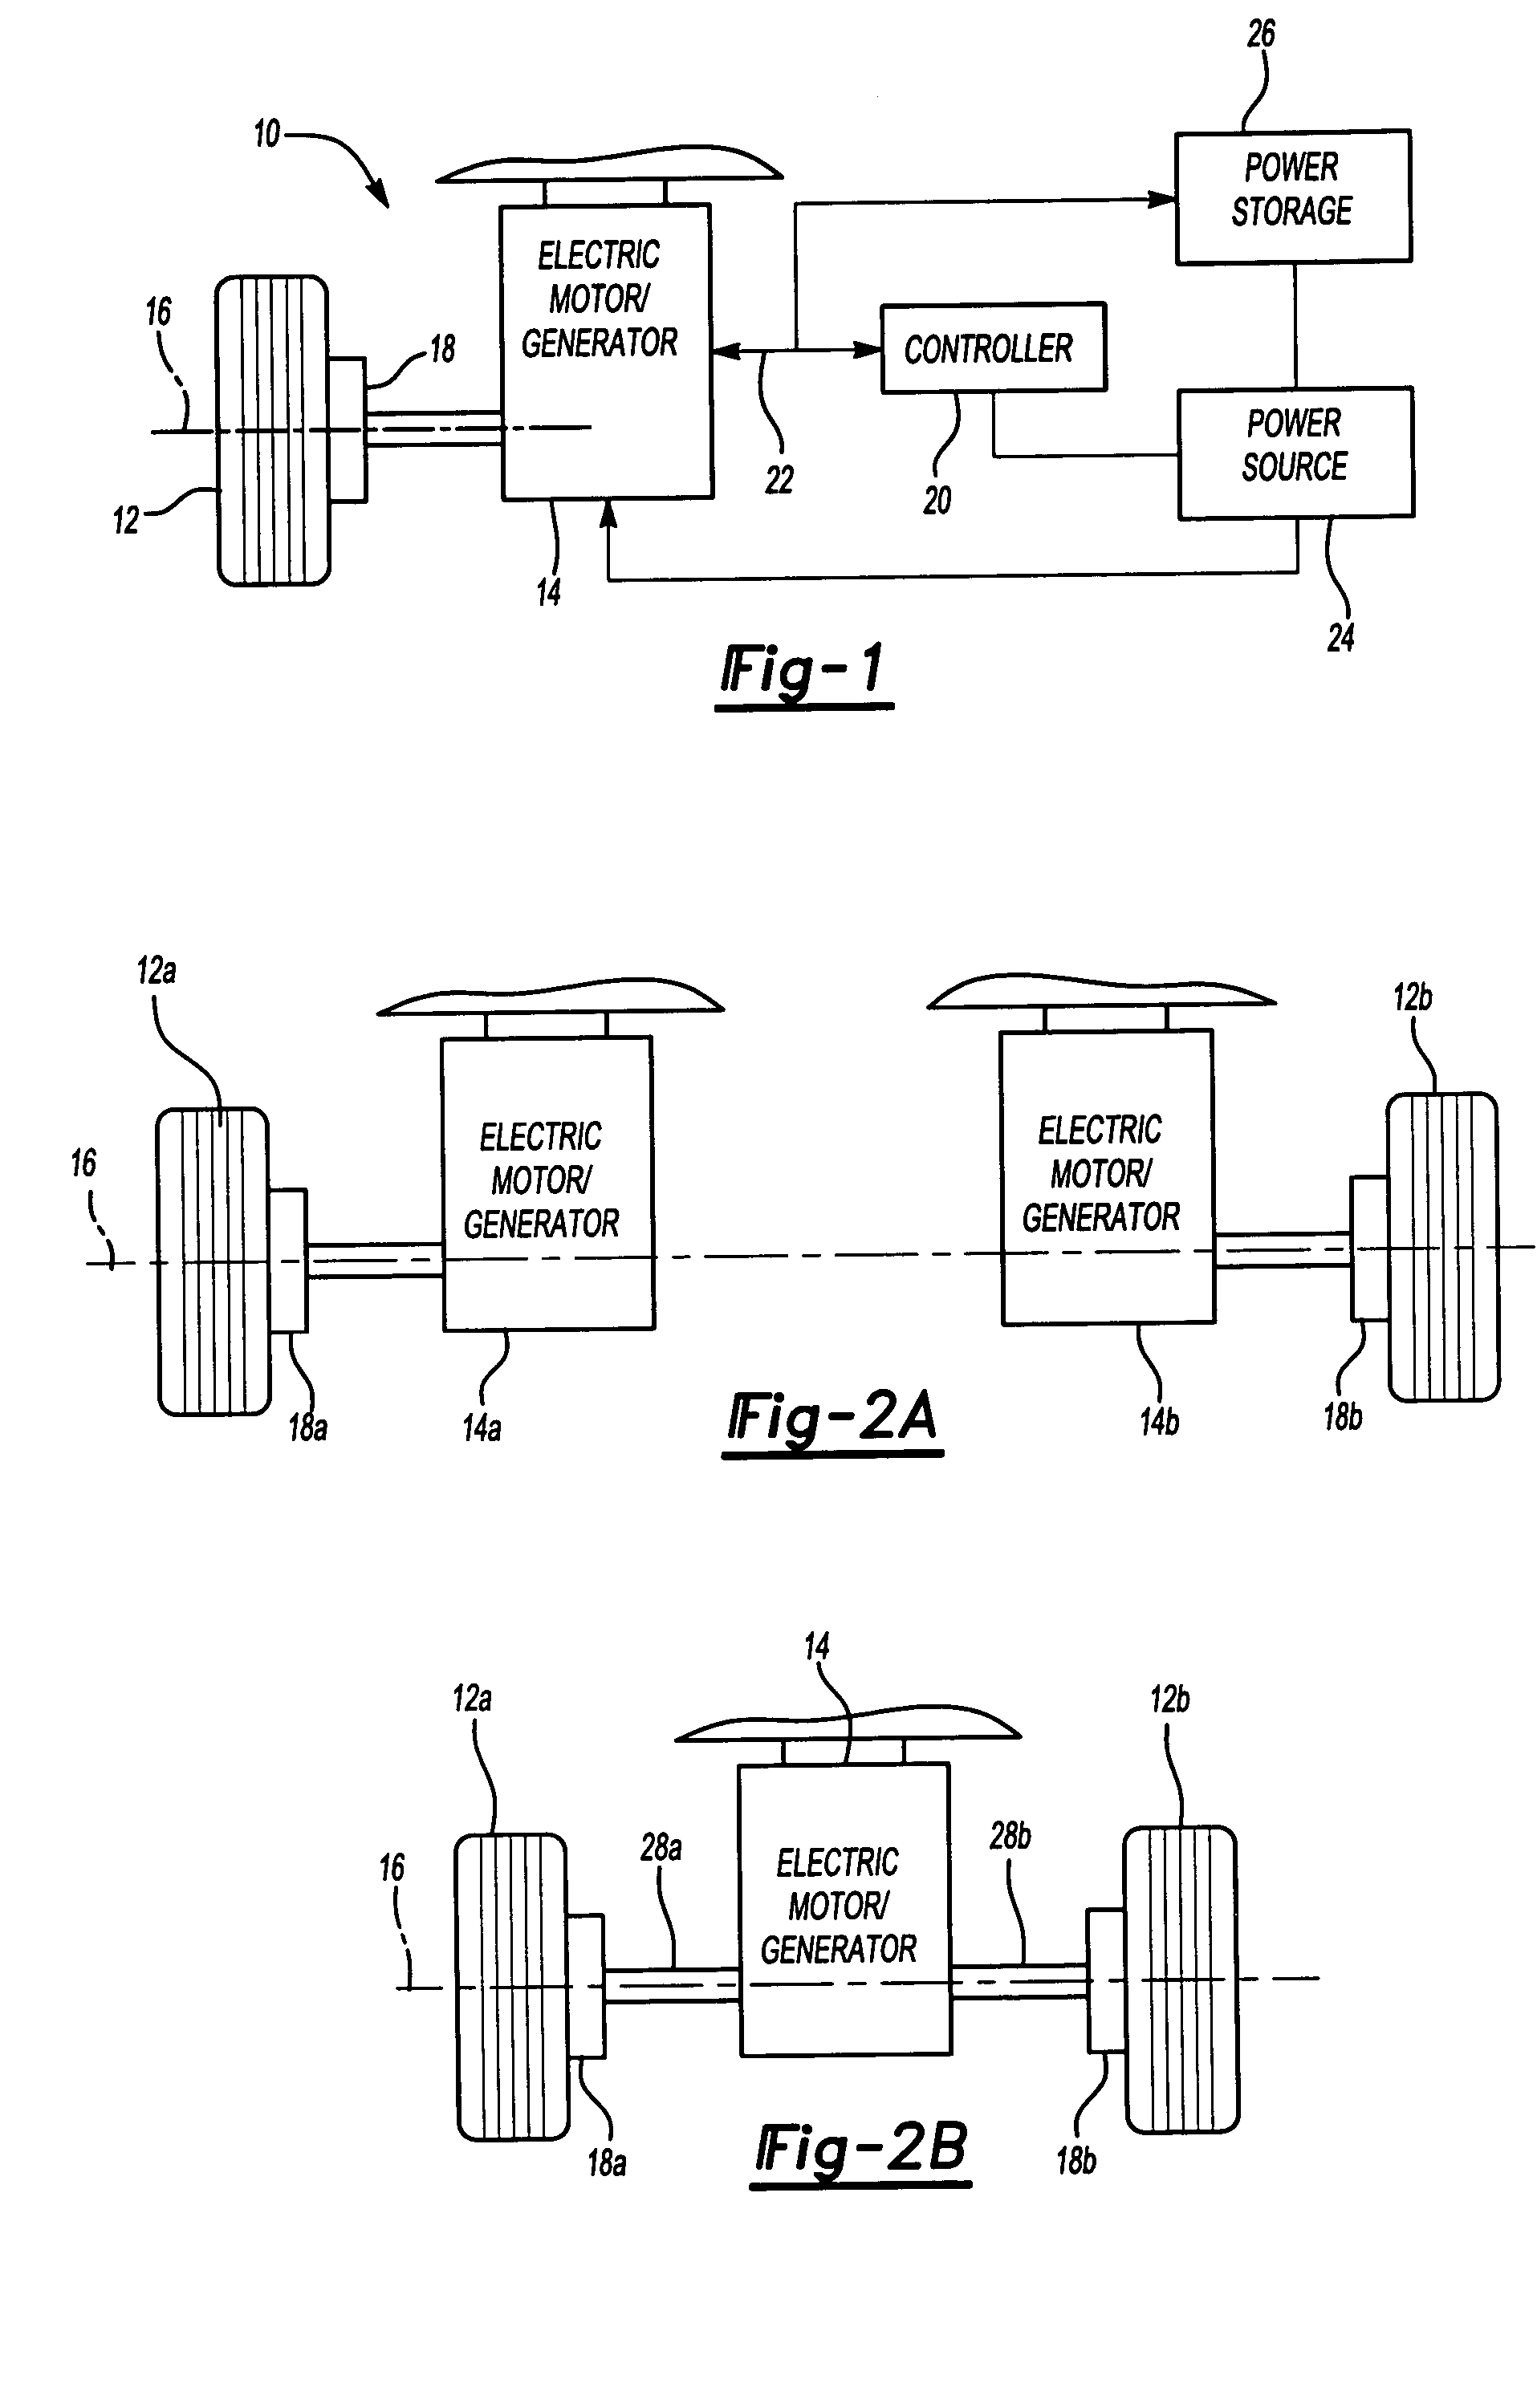 Electric motor and gear drive assembly for driving a vehicle wheel